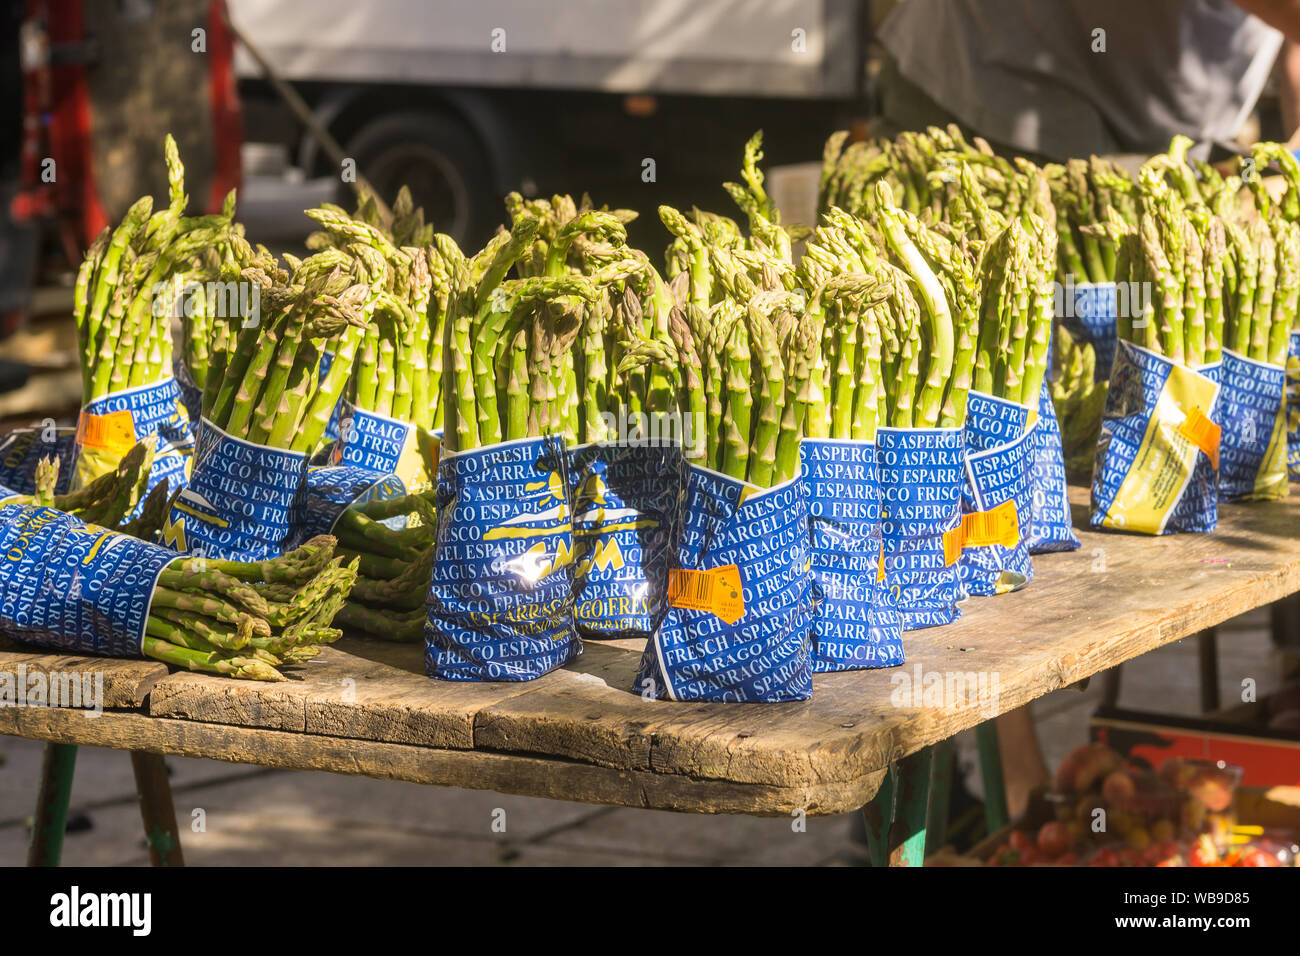 Sparrow grass bundles (Asparagus officinalis) sold at a farmers market in Paris, France, Europe. Stock Photo